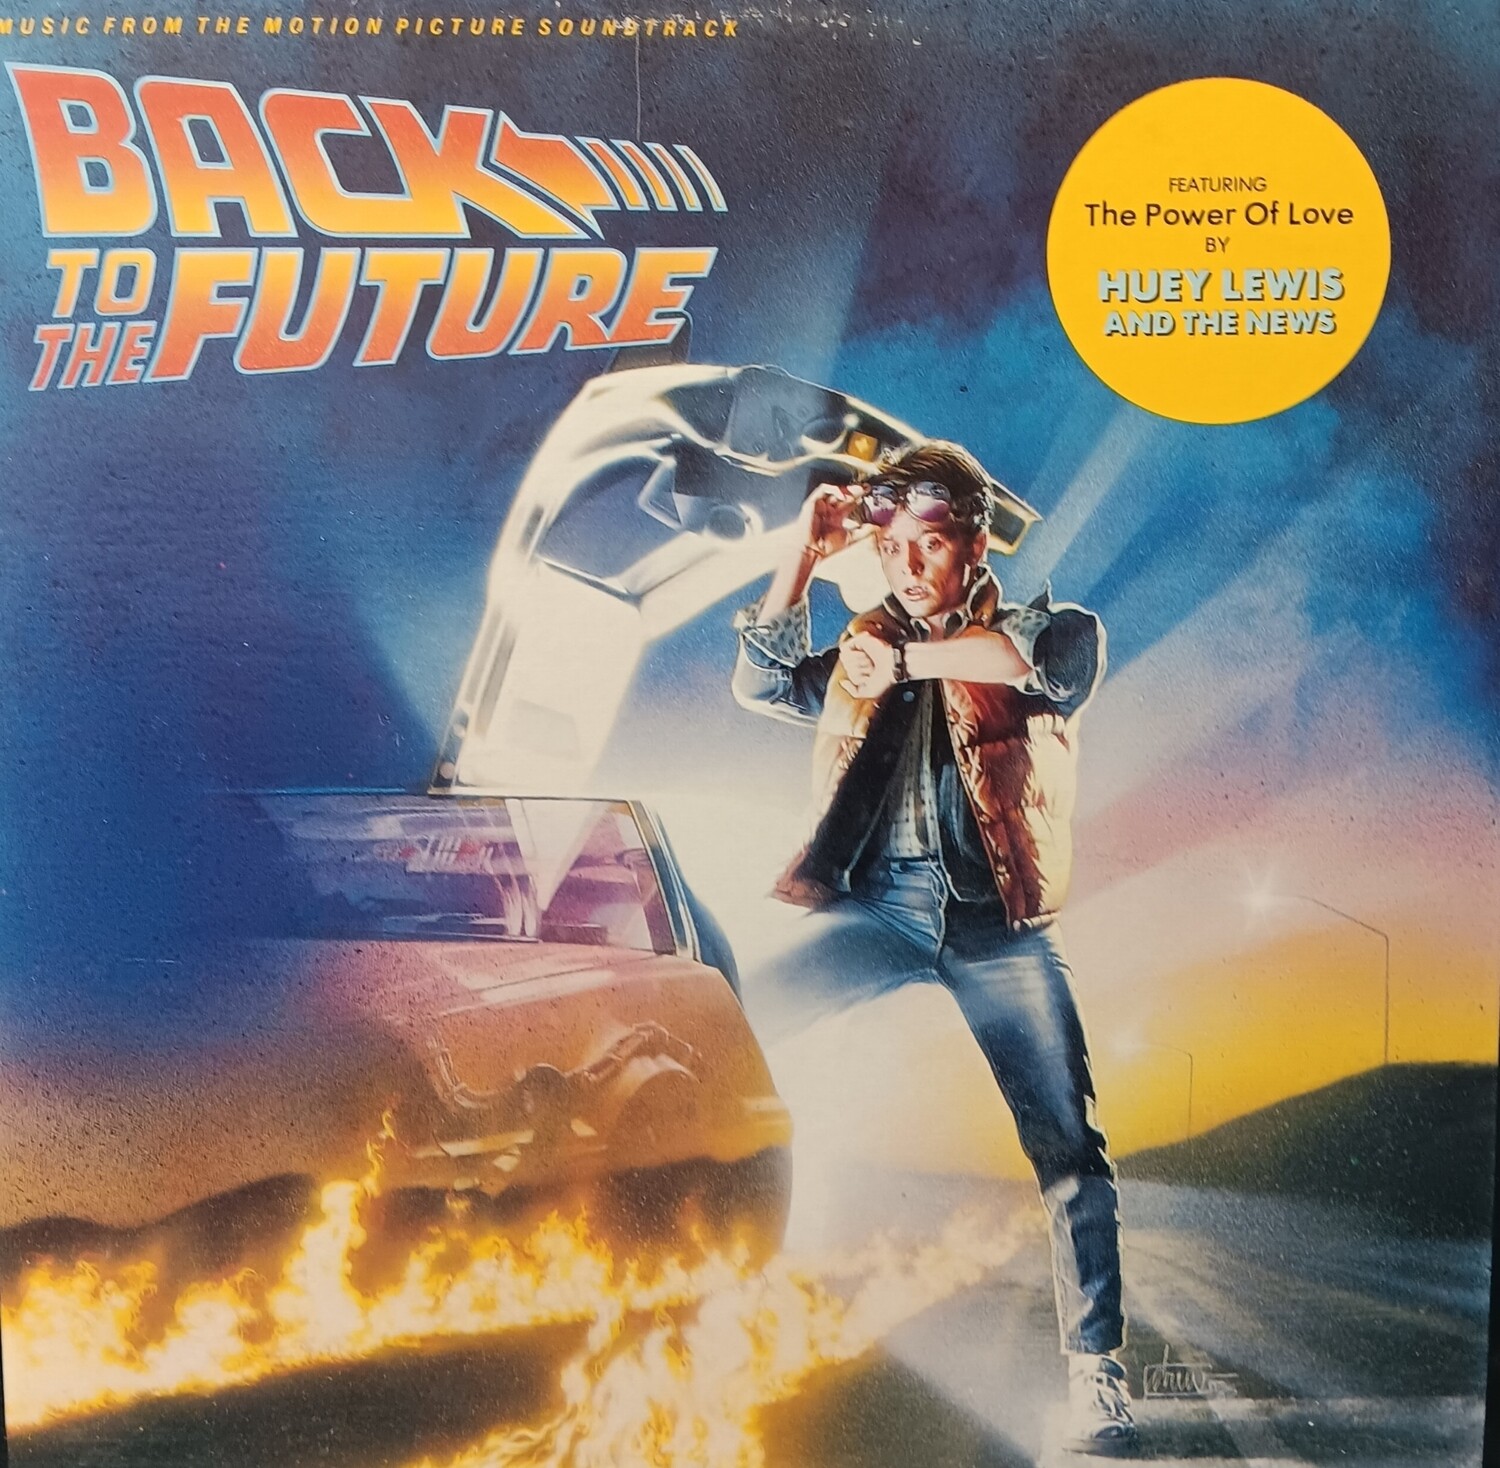 VARIOUS - Back to the future soundtrack